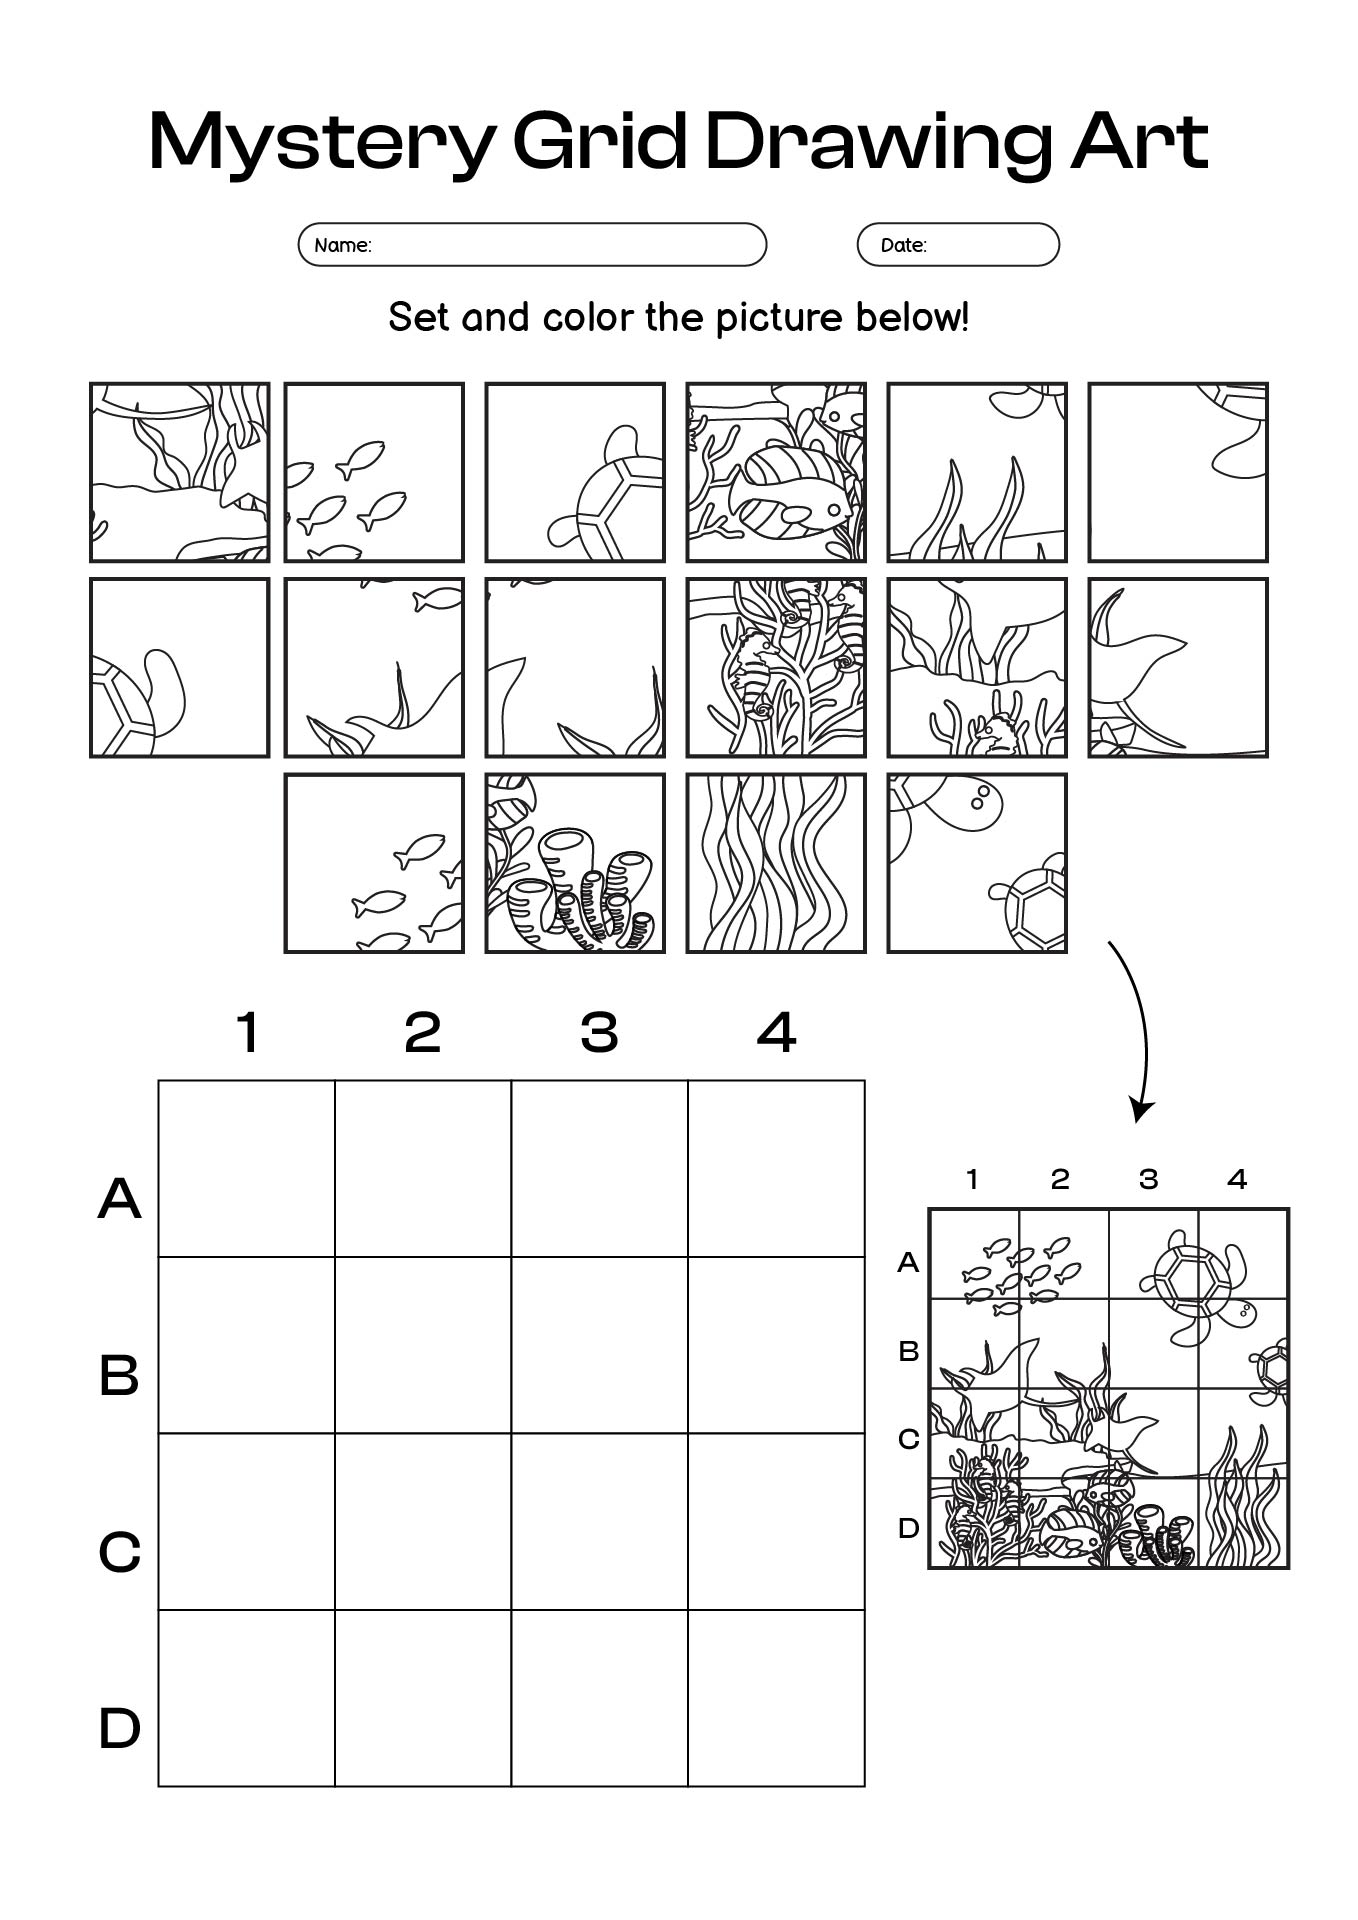 Mystery Grid Drawing Art Exercises for Kids